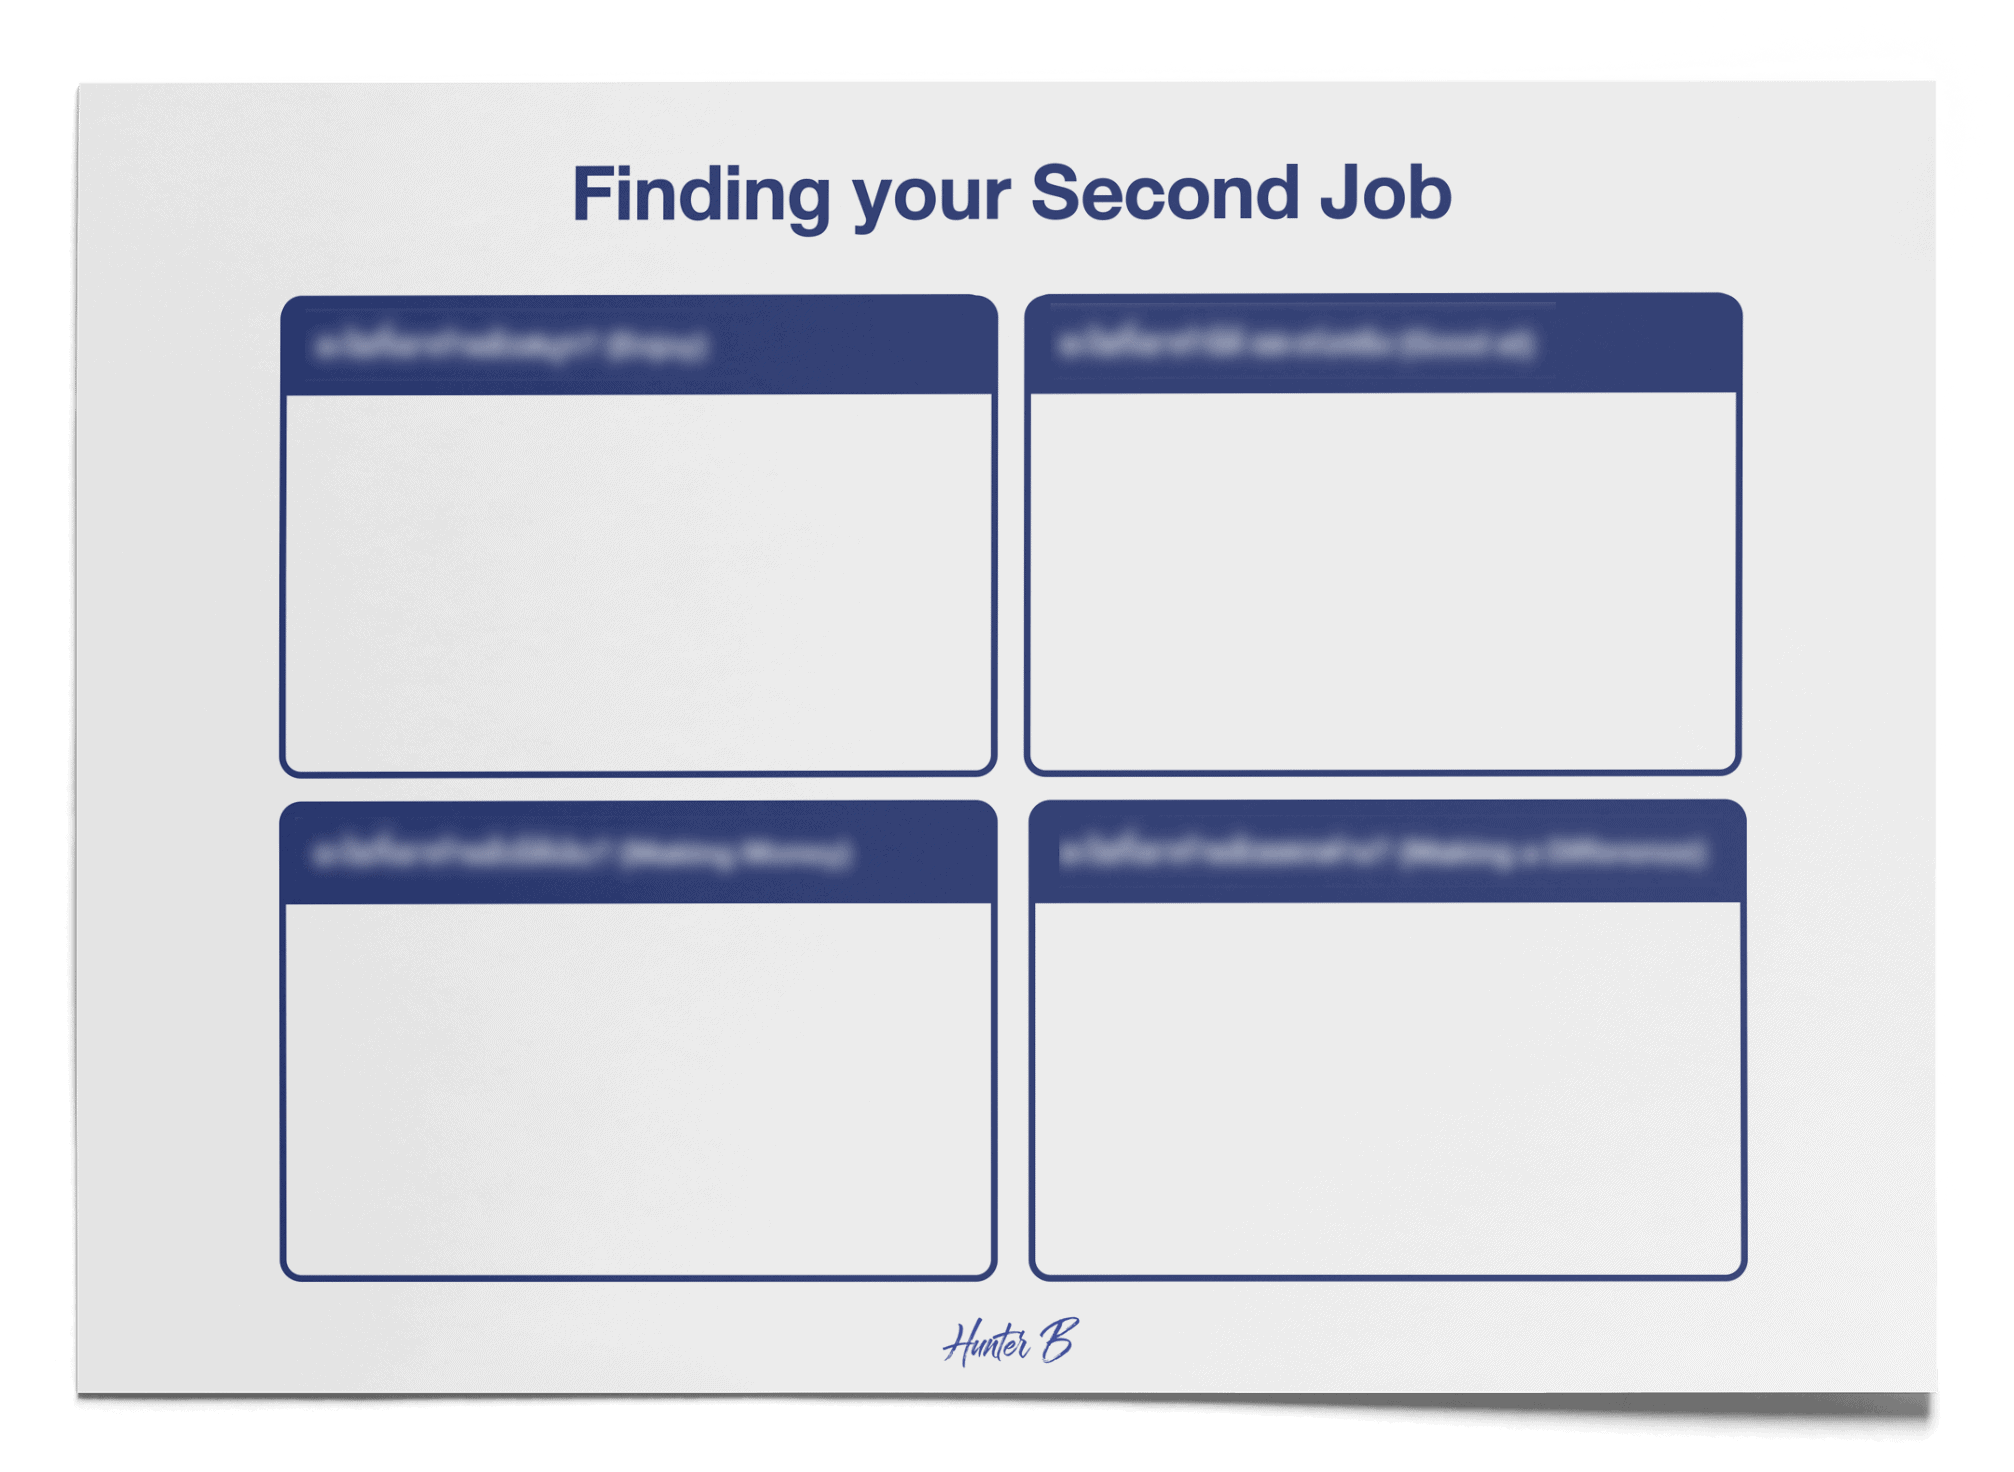 Finding your second job